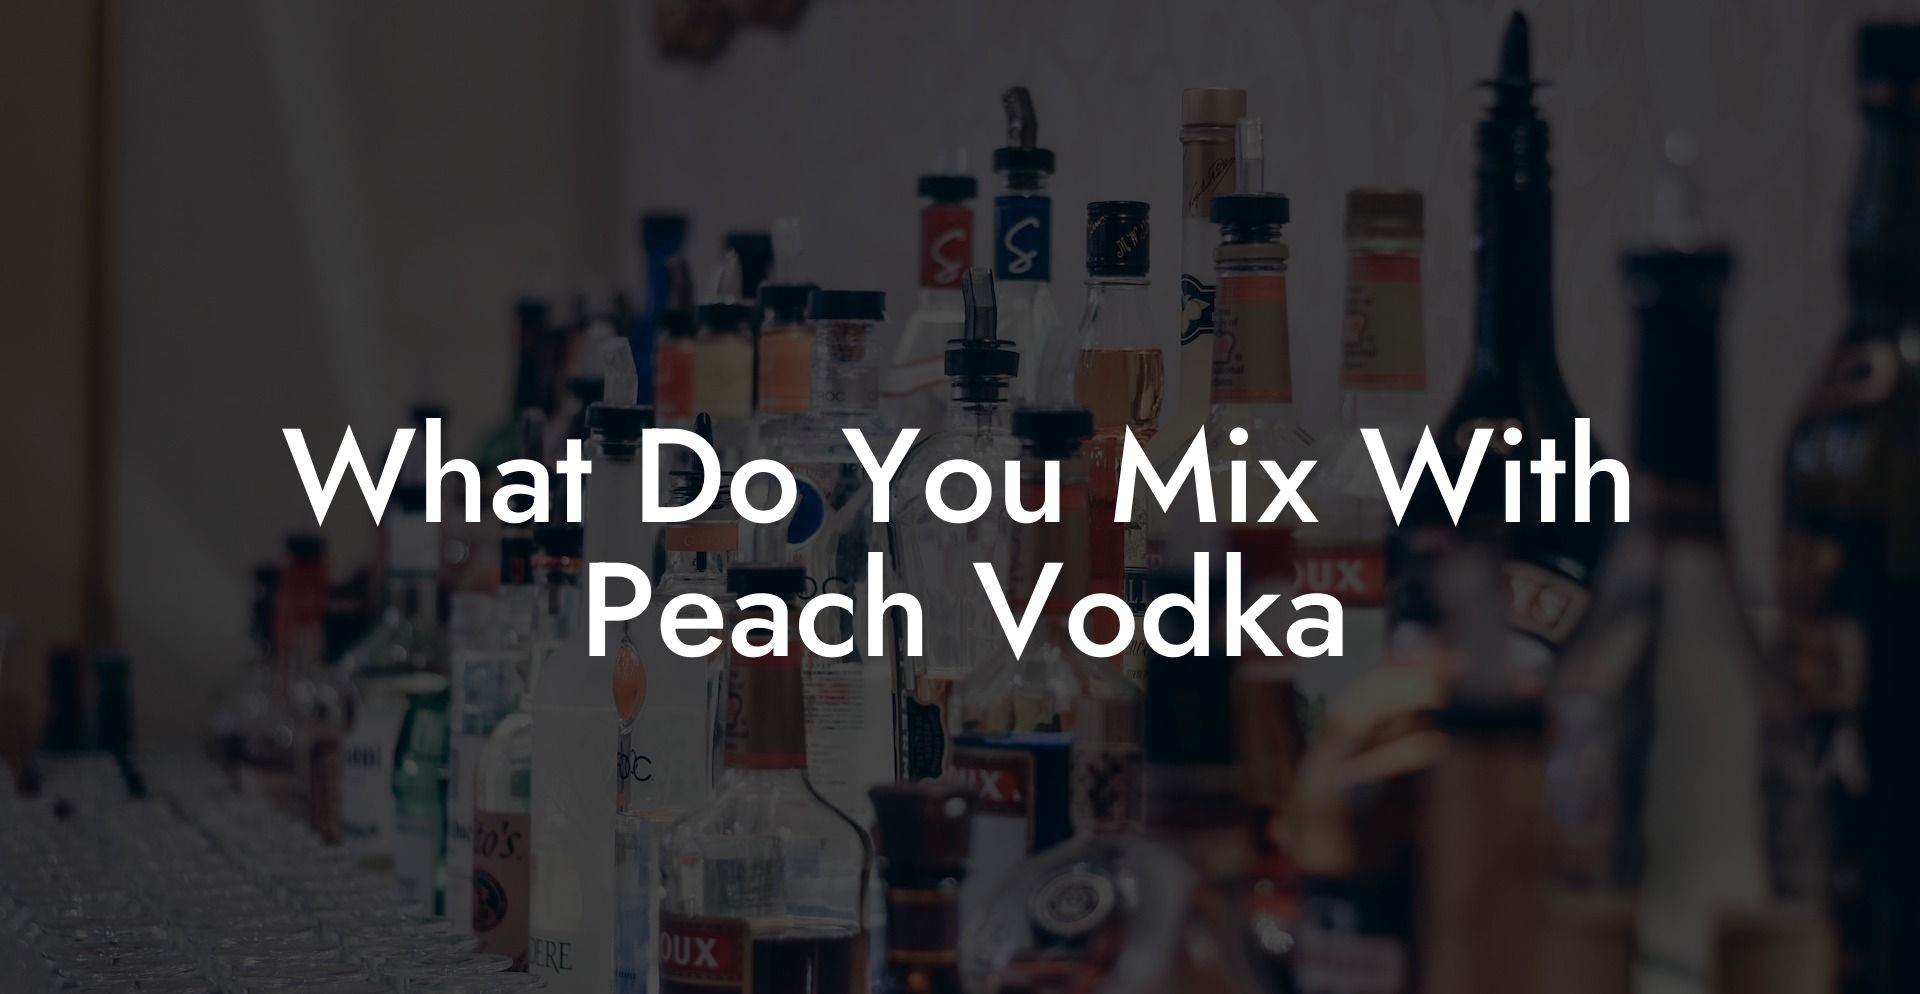 What Do You Mix With Peach Vodka